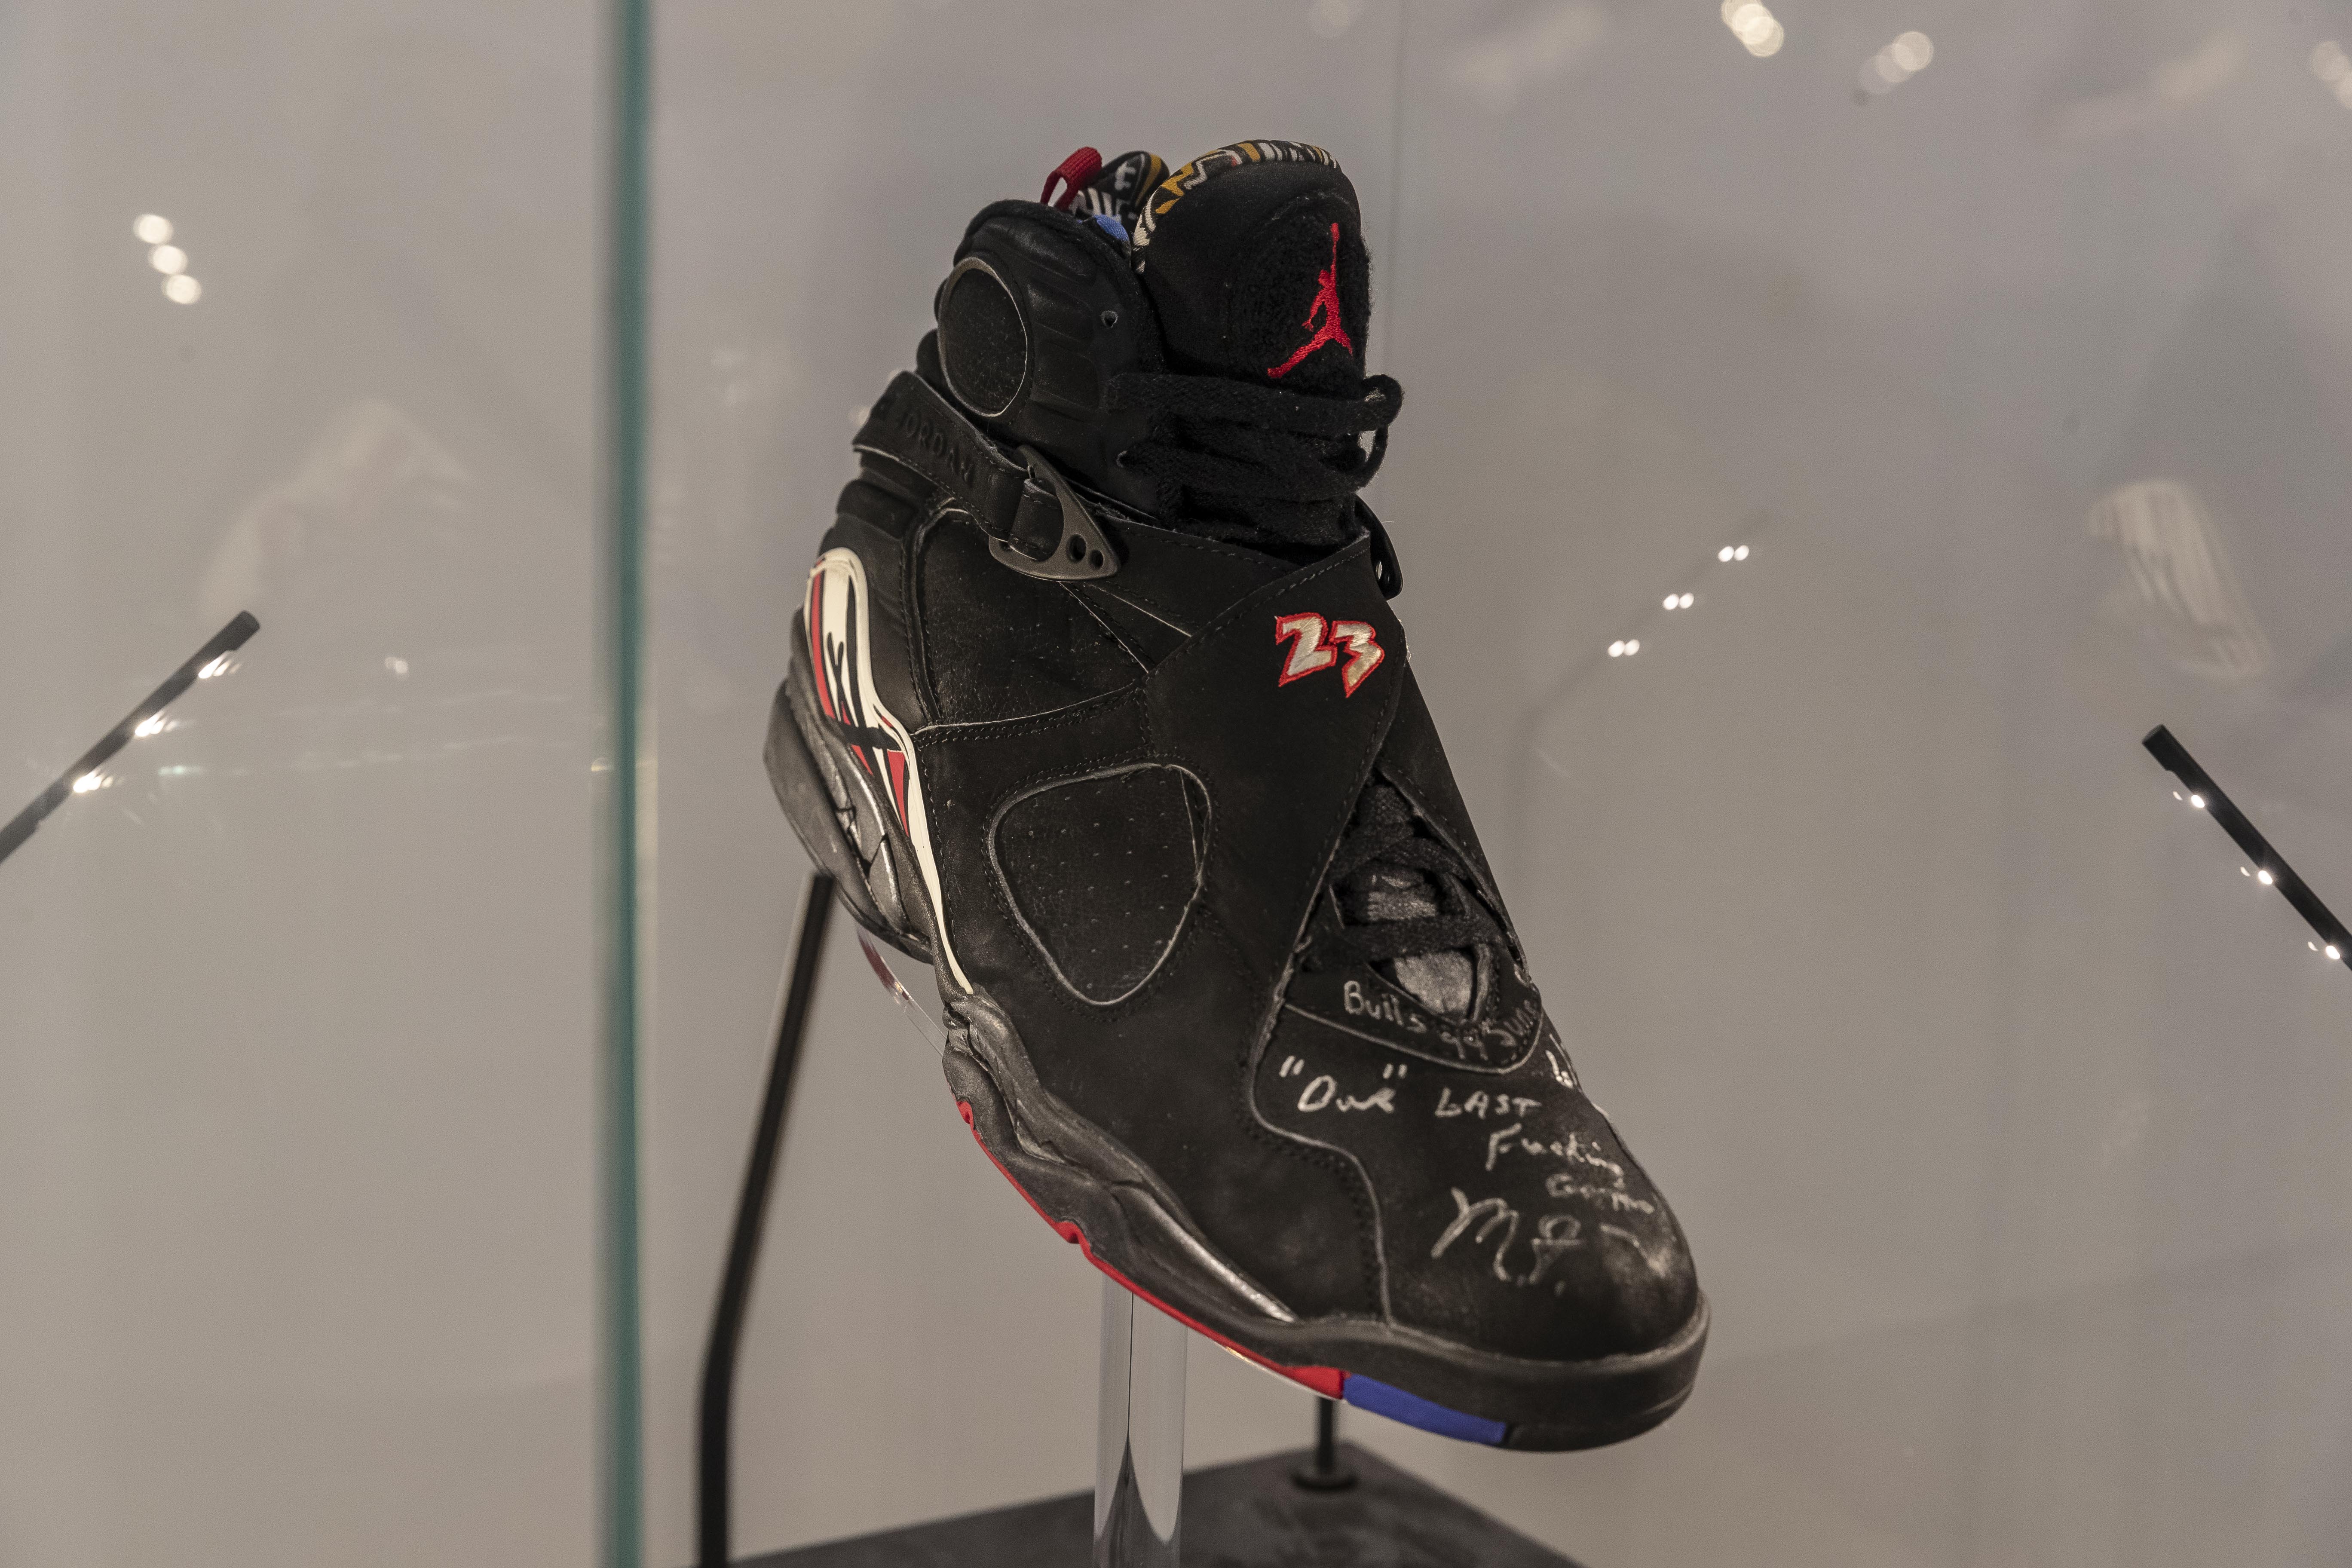 Michael Jordan 1998 sneakers become the priciest pair ever purchased